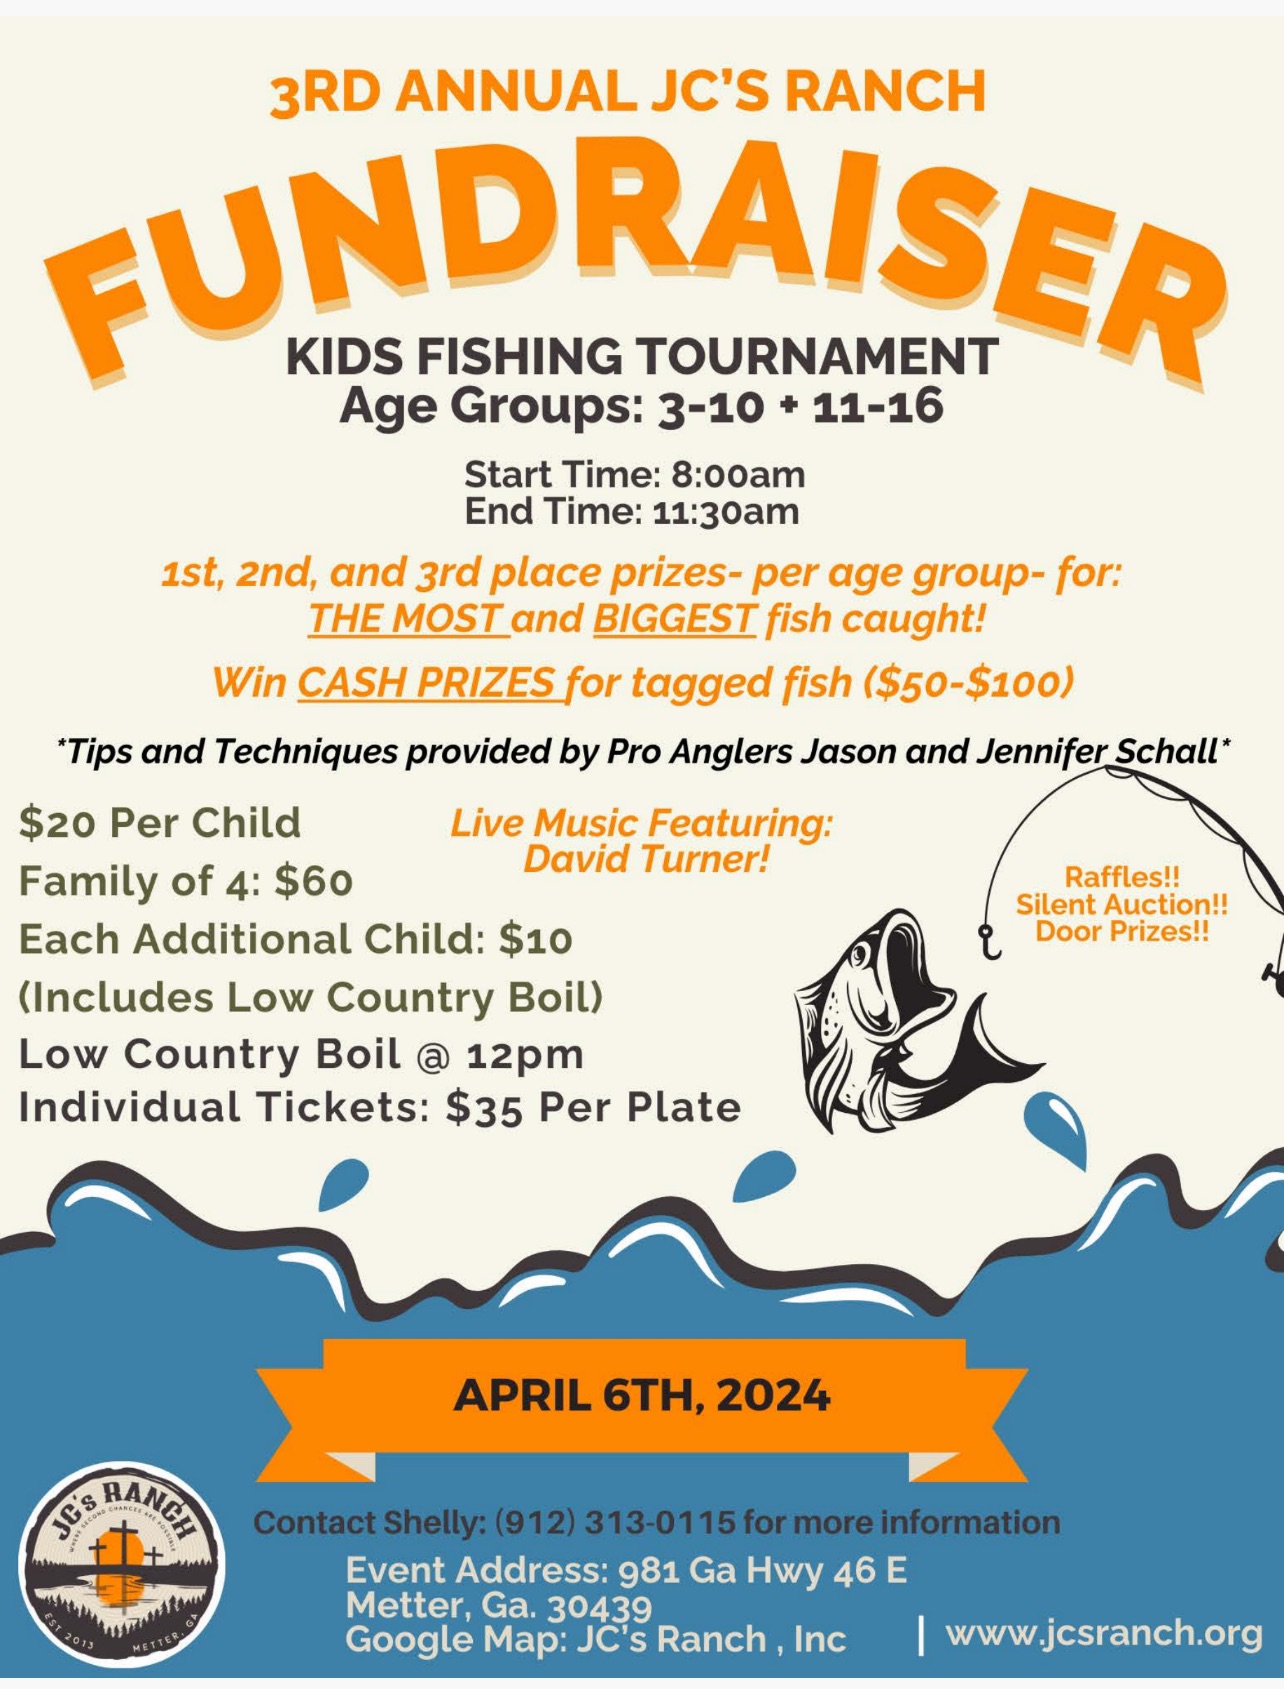 3rd Annual JC's Ranch Kids Fishing Tournament @ JC's Ranch | Metter | Georgia | United States